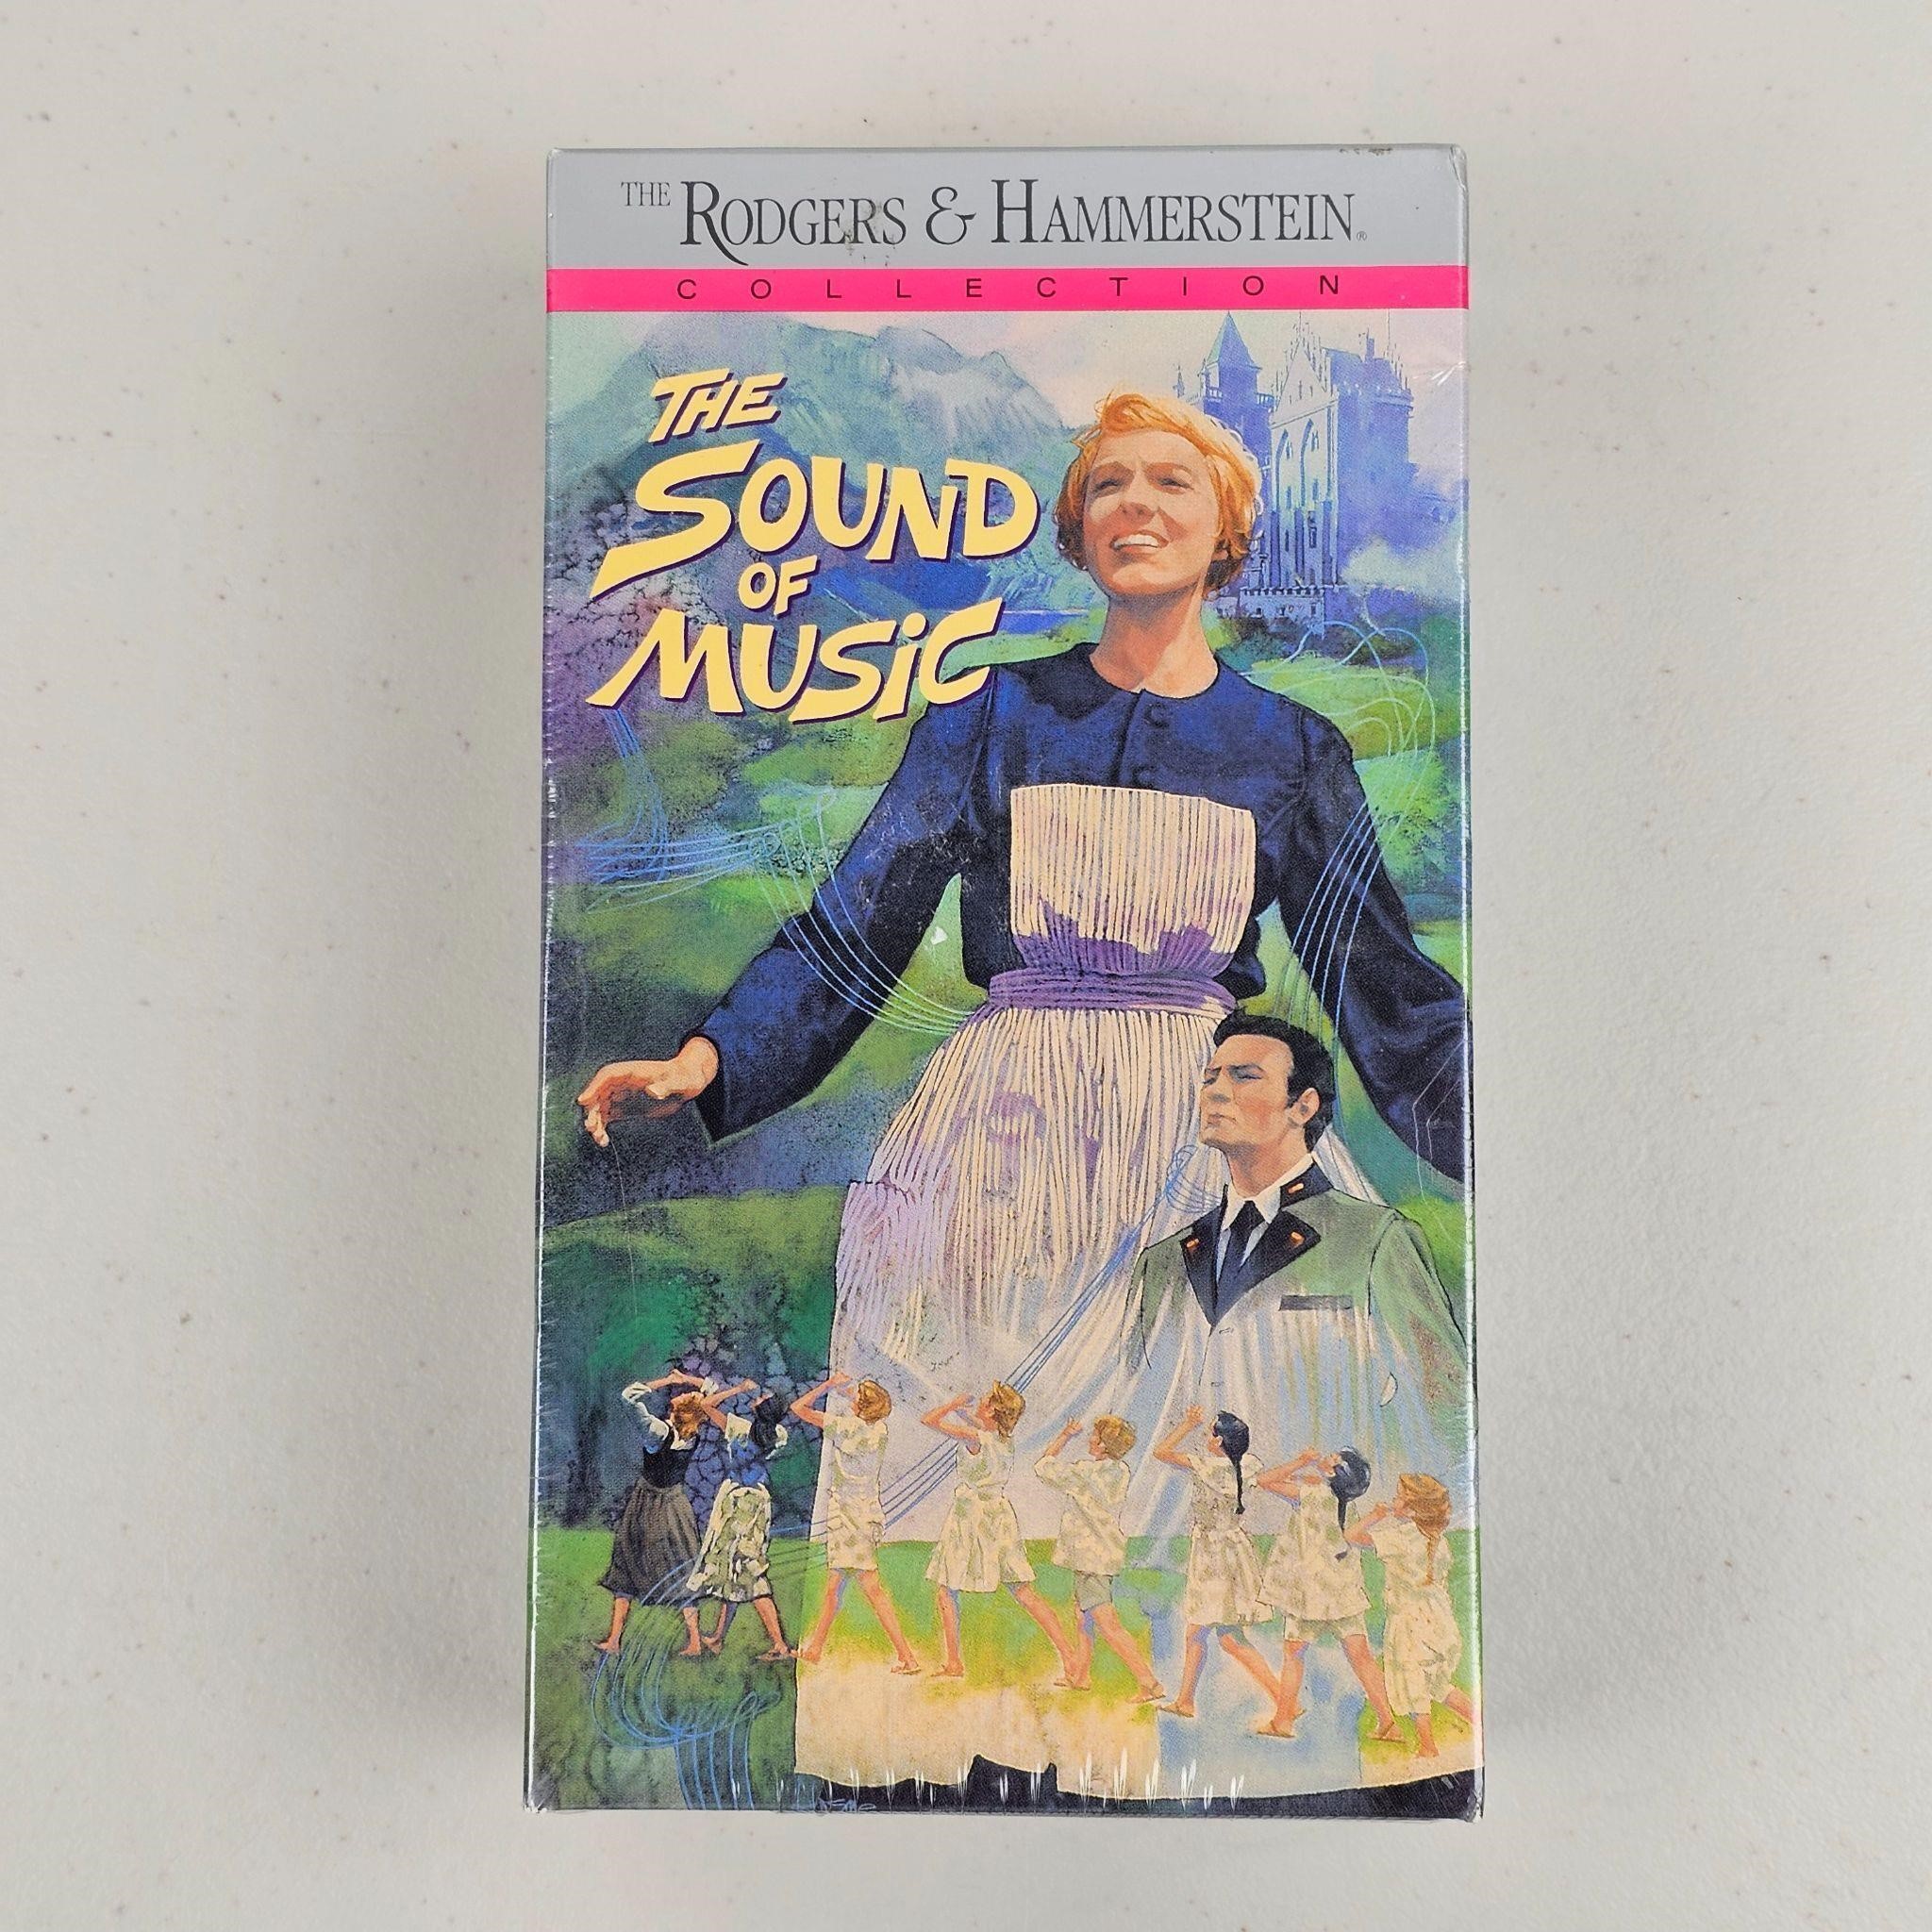 NEW/Sealed - The Sound of Music VHS Tapes